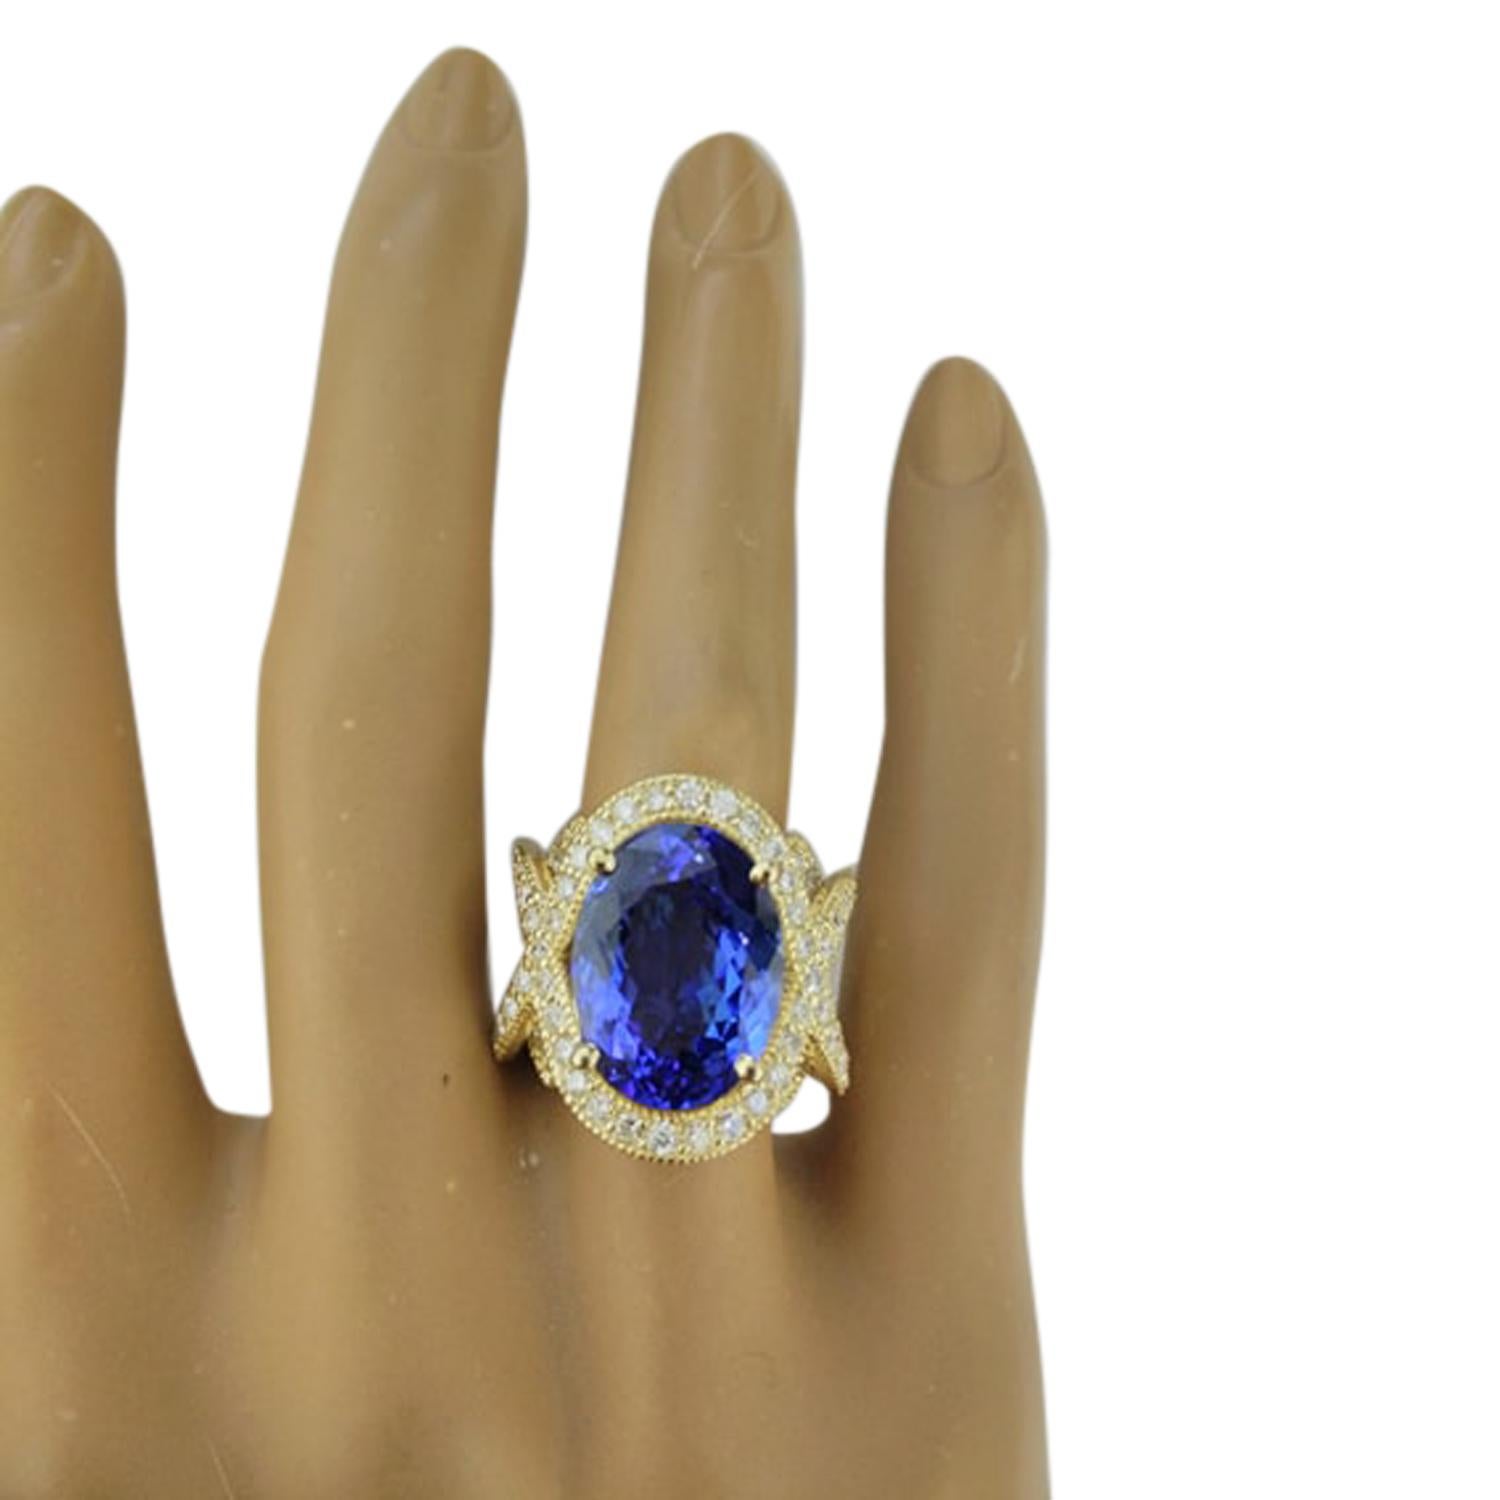 10.58 Carat Natural Tanzanite 14 Karat Solid Yellow Gold Diamond Ring
Stamped: 14K 
Total Ring Weight: 13 Grams 
Center Tanzanite Weight: 8.58 Carat (15.00x11.00 Millimeters) 
Diamond Weight: 2.00 Carat (F-G Color, VS2-SI1 Clarity)
Quantity: 88
Face